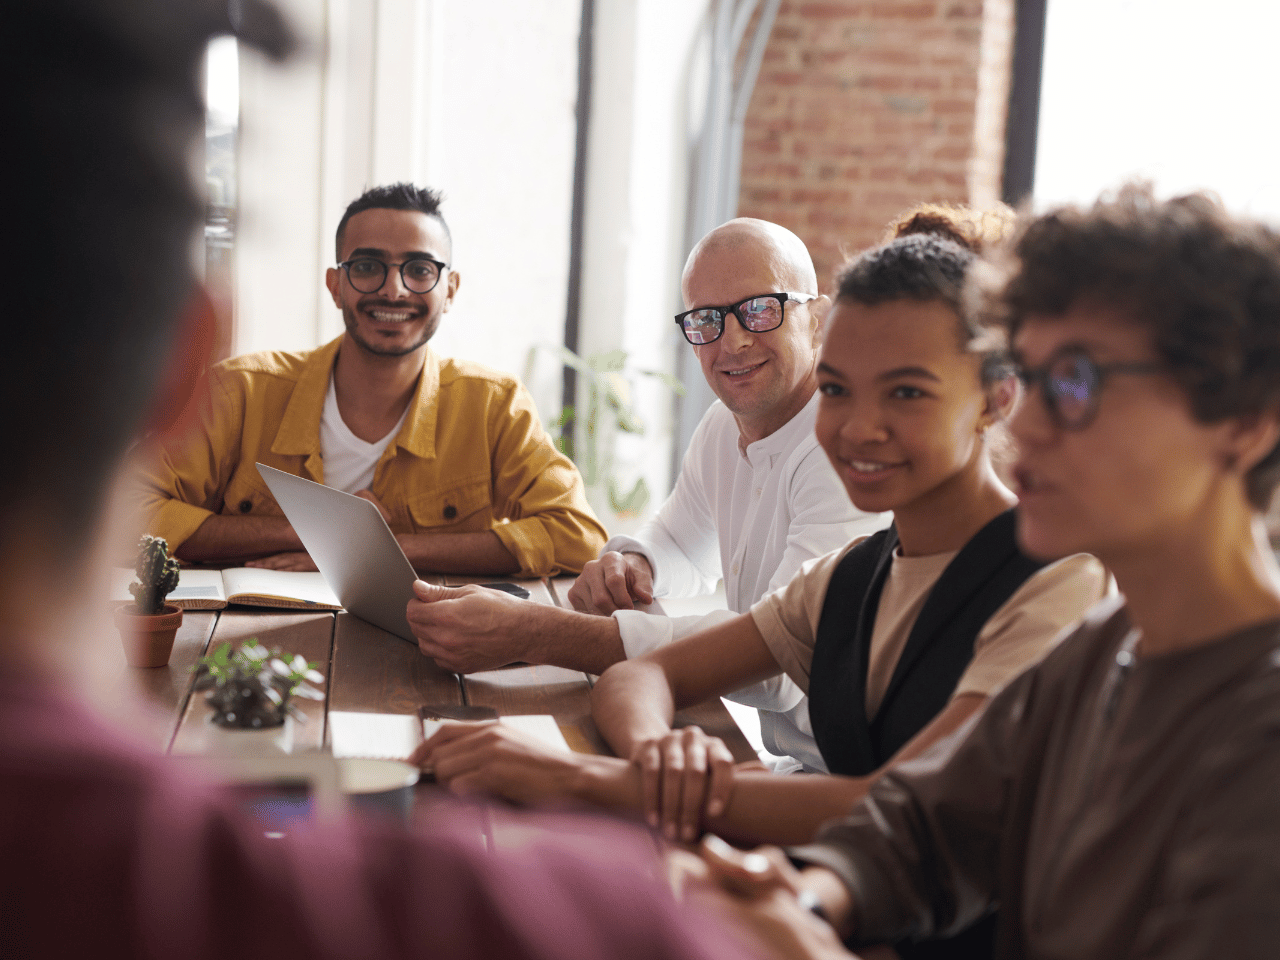 5 Clues to Identify a Company Committed to Diversity and Inclusion